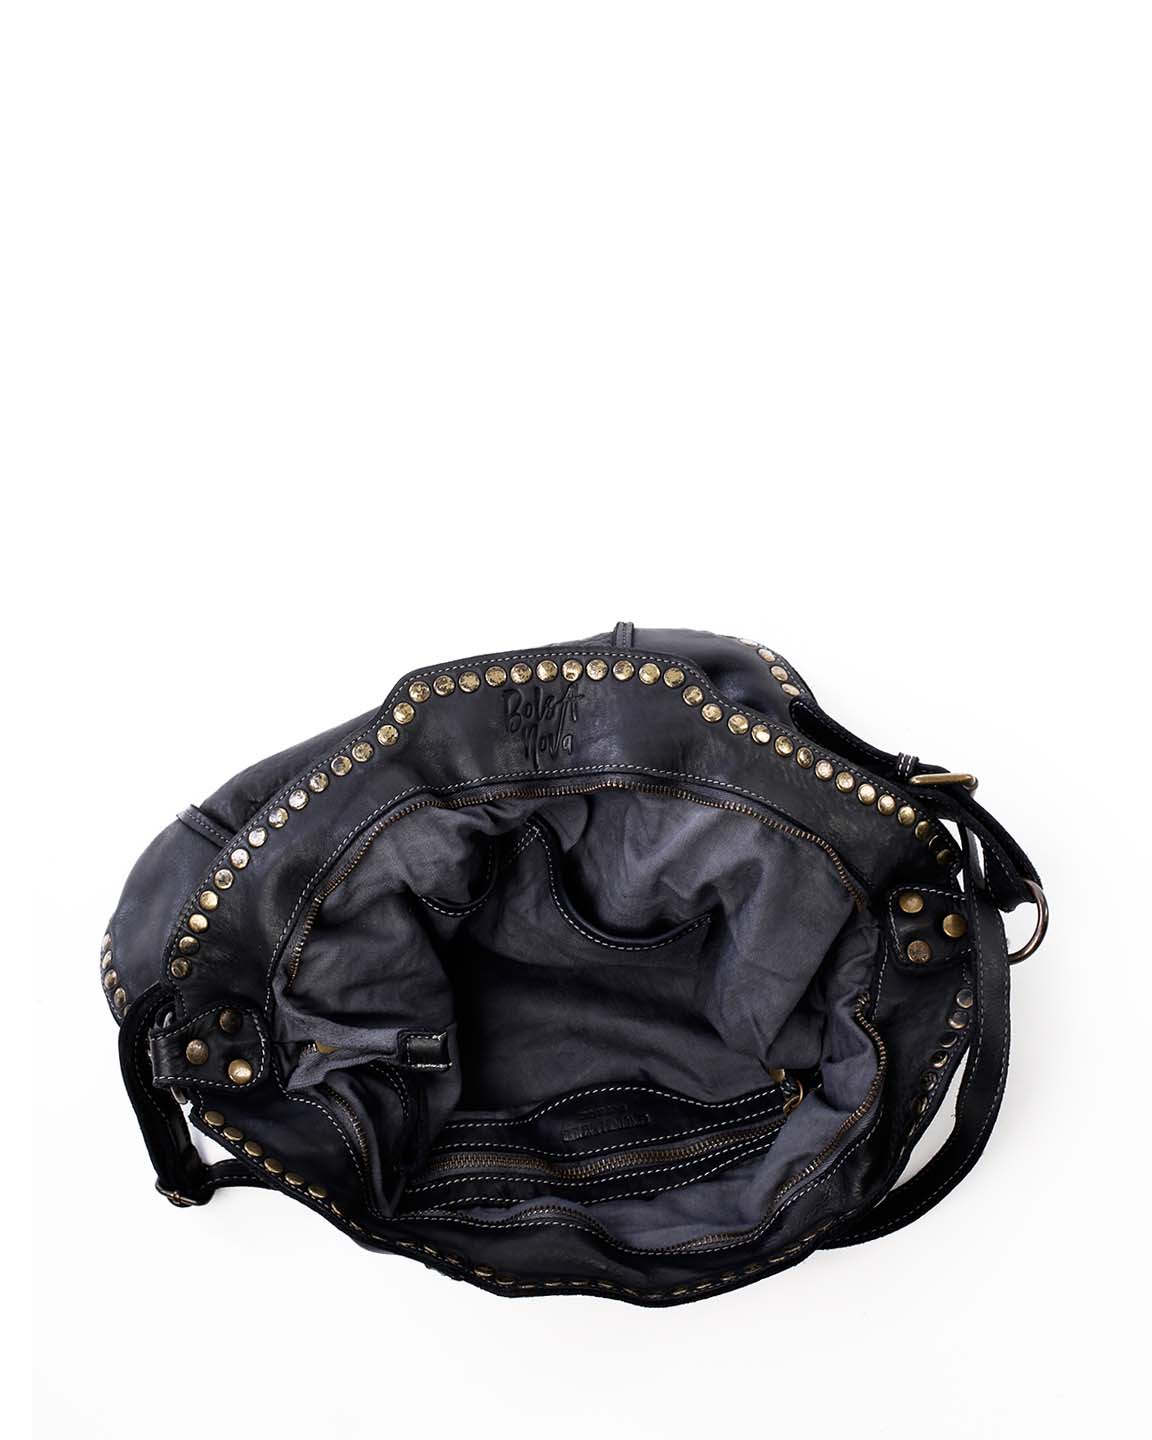 Inside View Anna Leather Hobo with Studs in Black